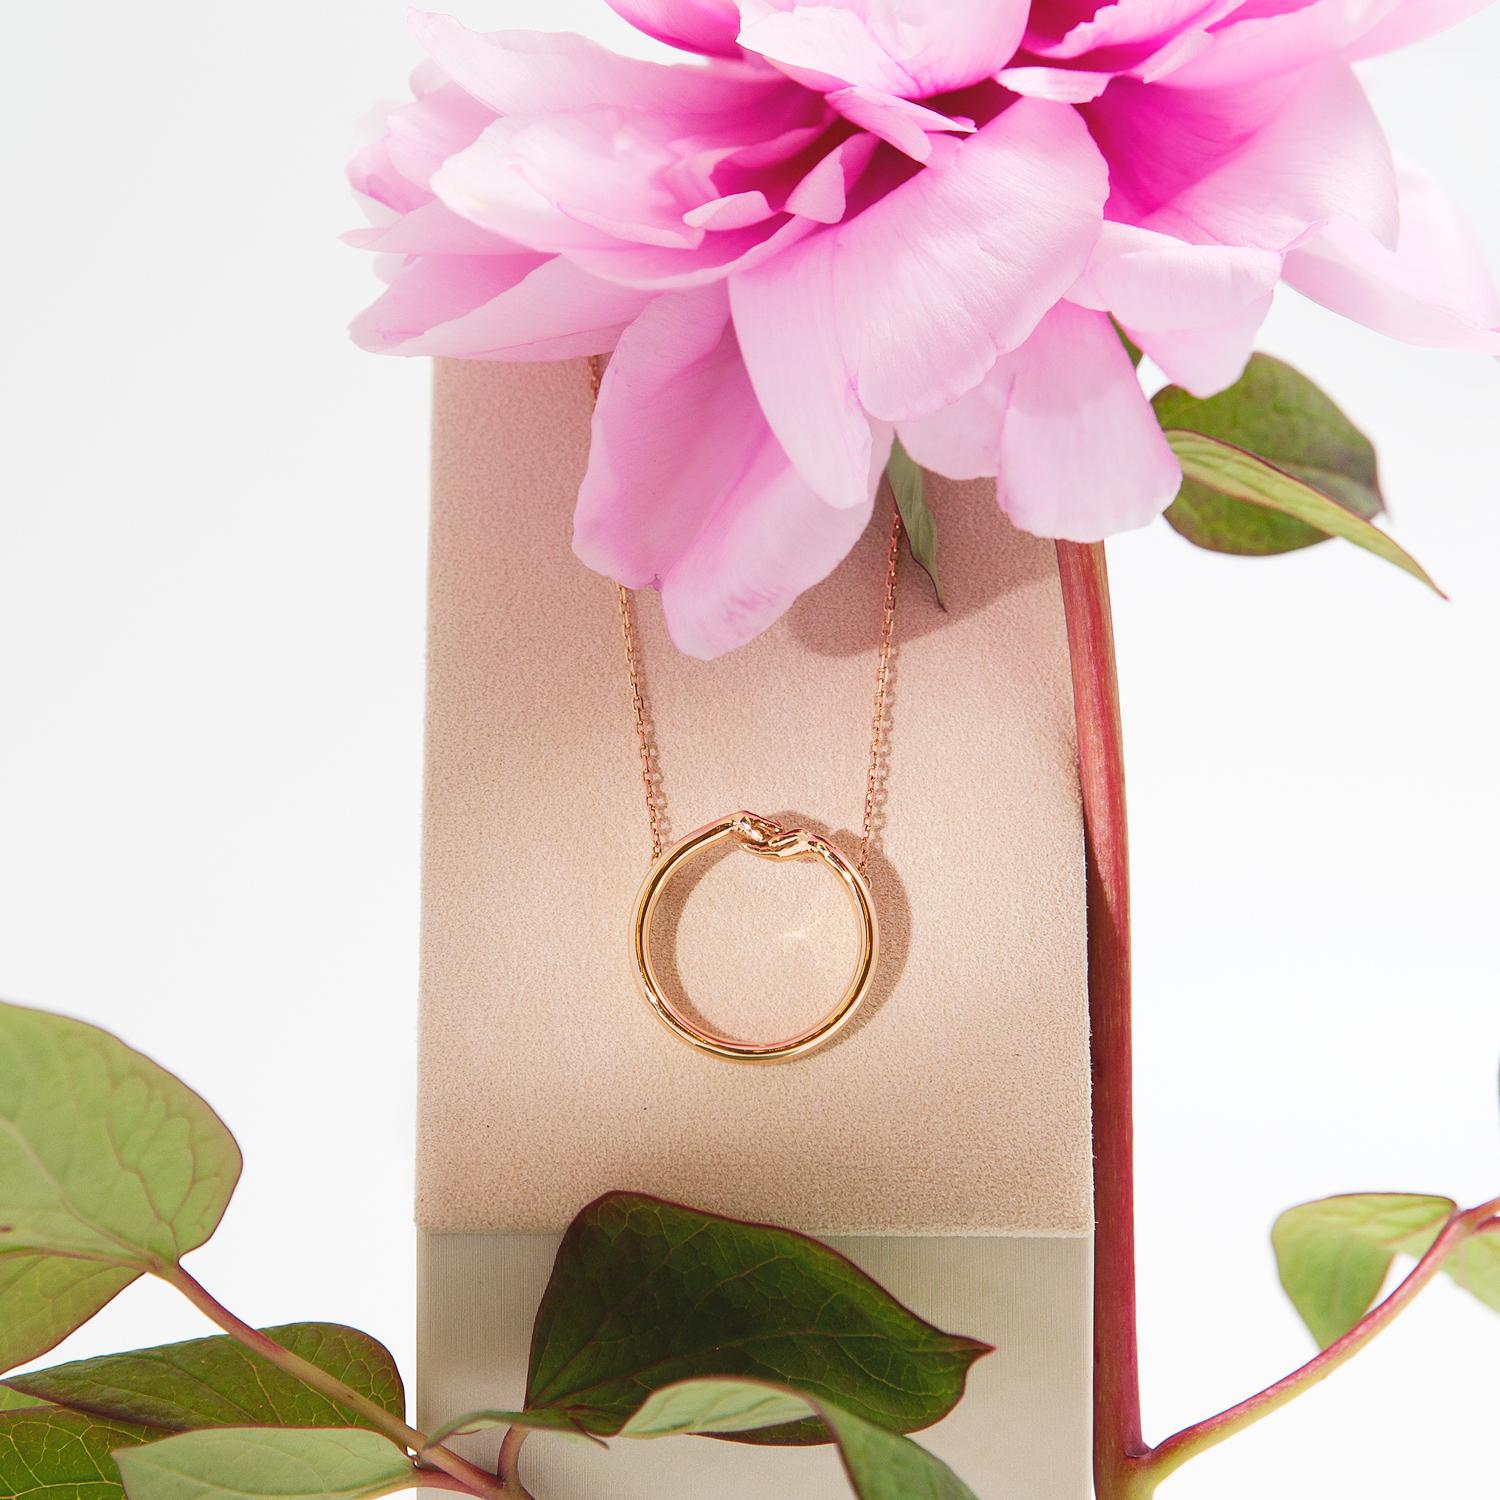 Give & Receive Pendant in solid 18ct Yellow Gold by Lorenzo Quinn Jewellery
Available in Yellow, White and Rose Gold, also available pave set with Rubies, White Diamonds, Yellow Diamonds, Black Diamonds or Blue Sapphires.
Chain length: